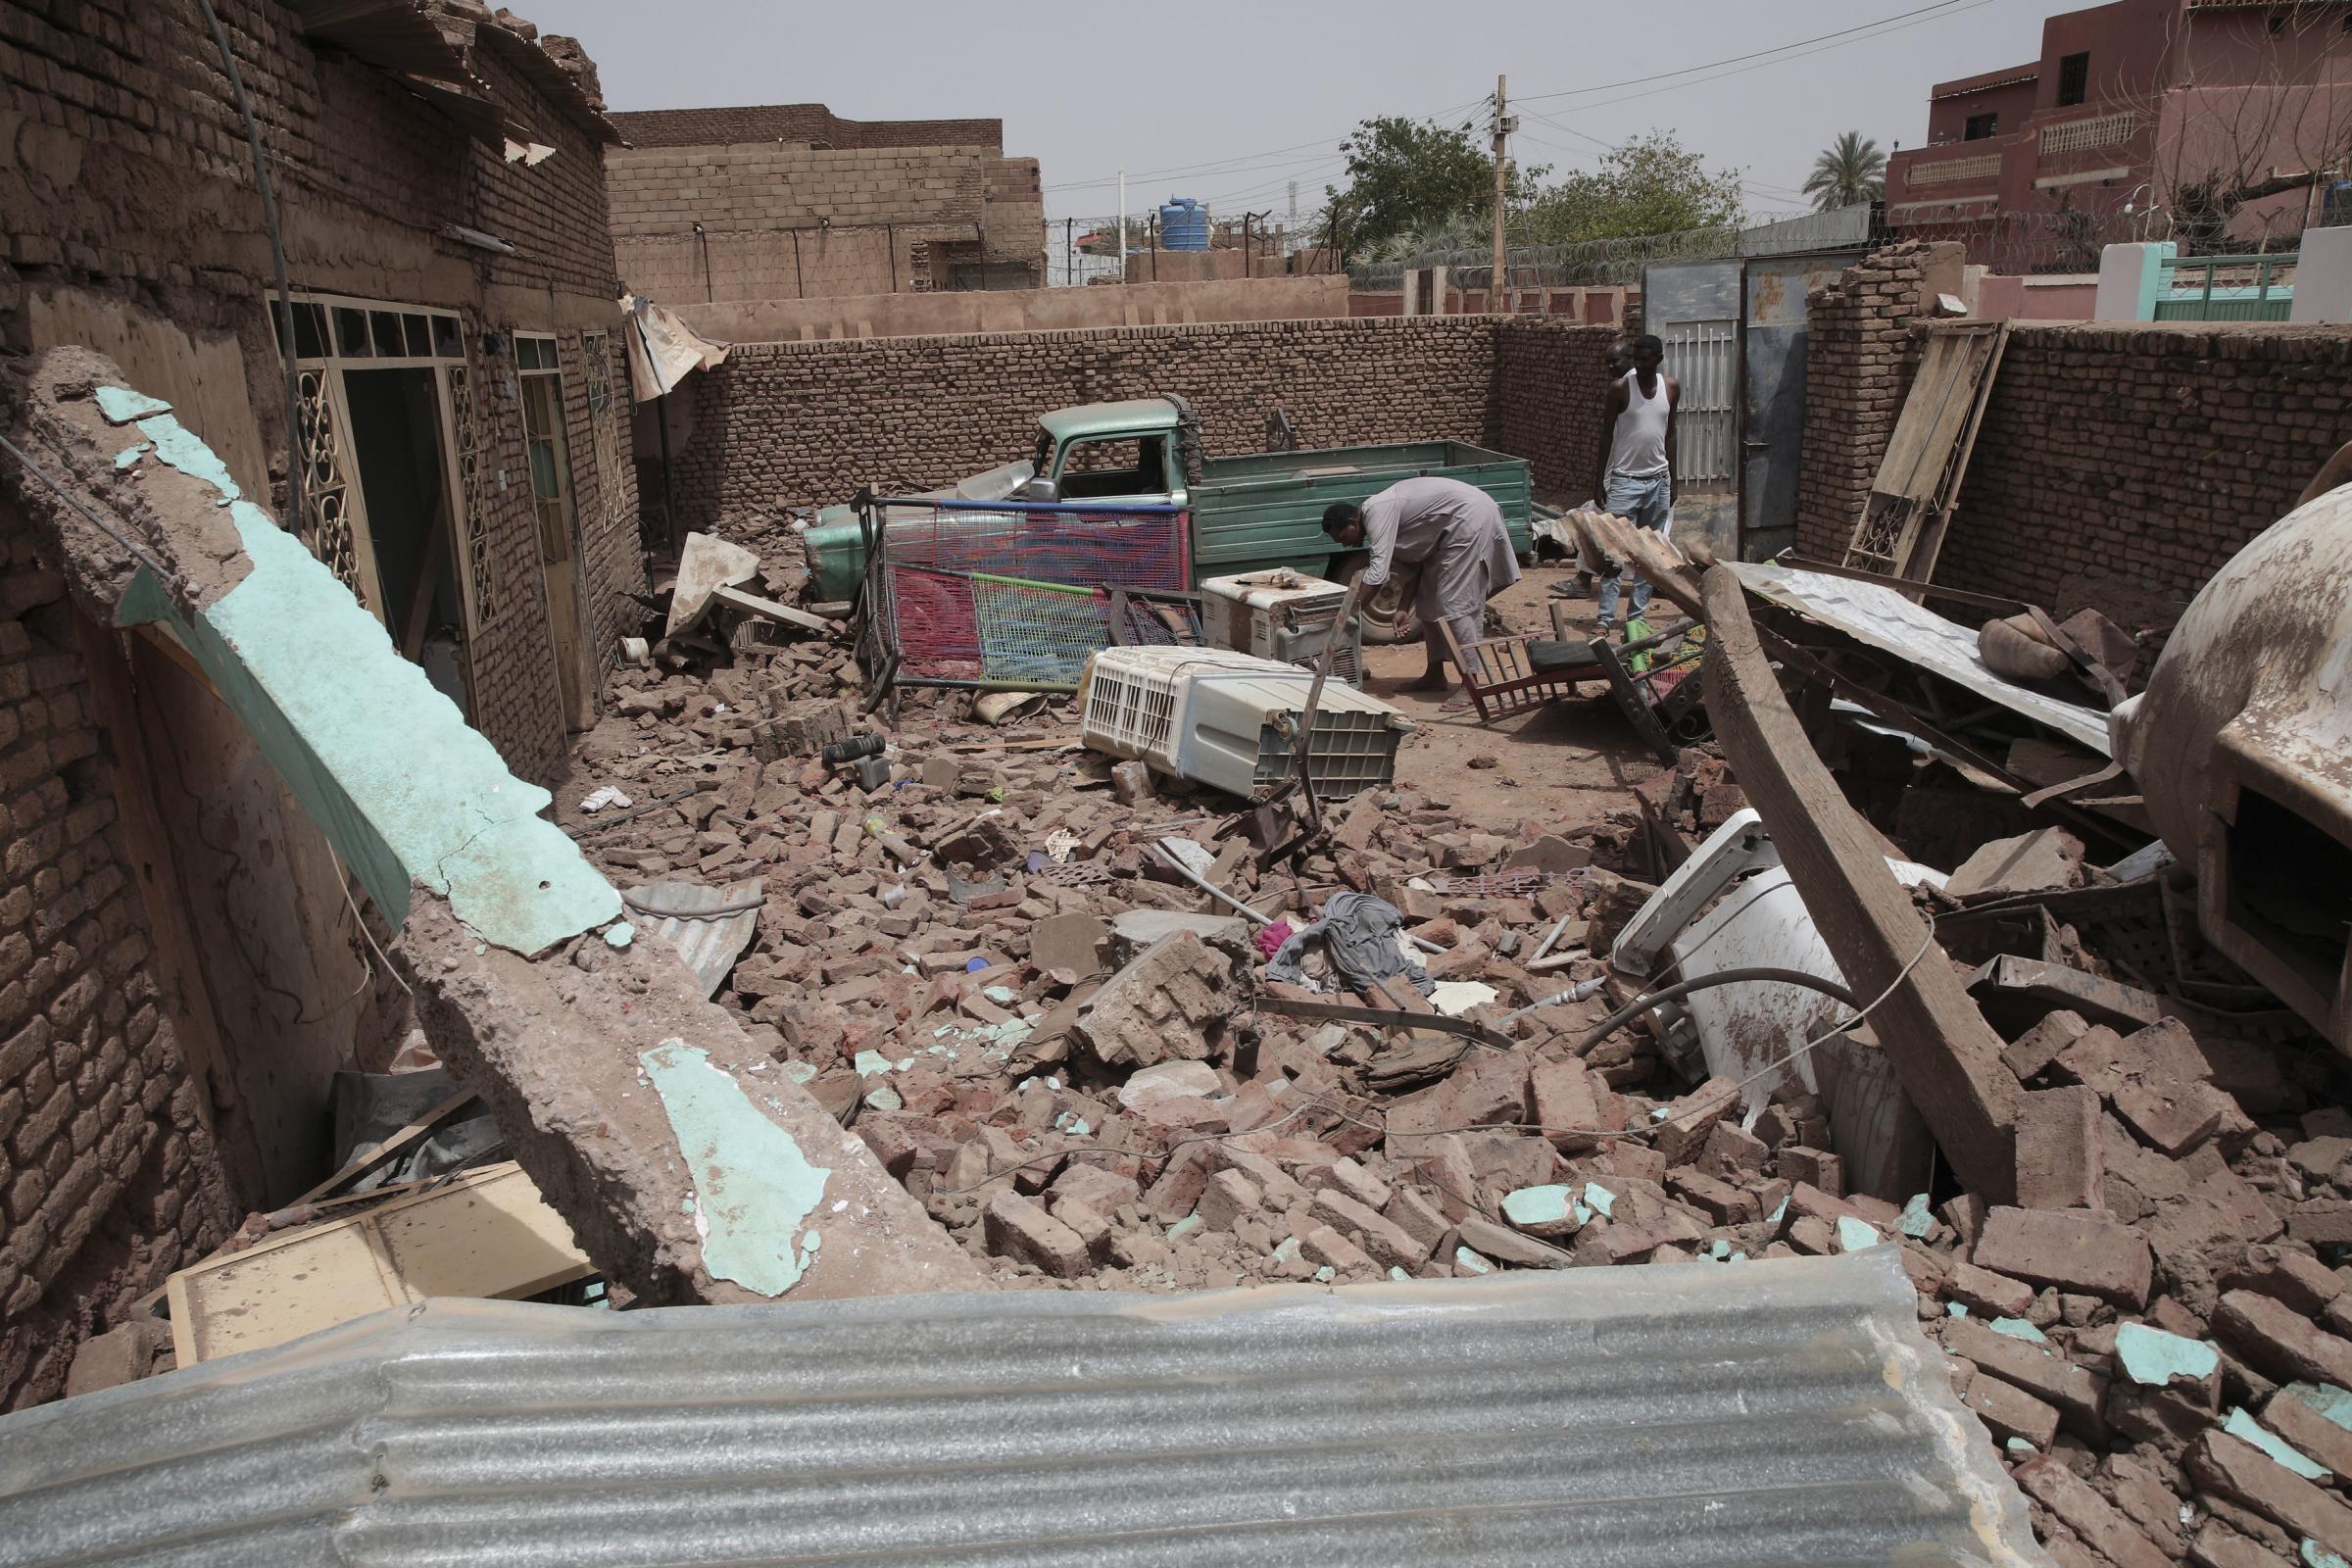 A man cleans debris of a house hit in recent fighting in Khartoum, Sudan, Tuesday, April 25, 2023. Sudans warring generals have pledged to observe a new three-day truce that was brokered by the United States and Saudi Arabia to try to pull Africas